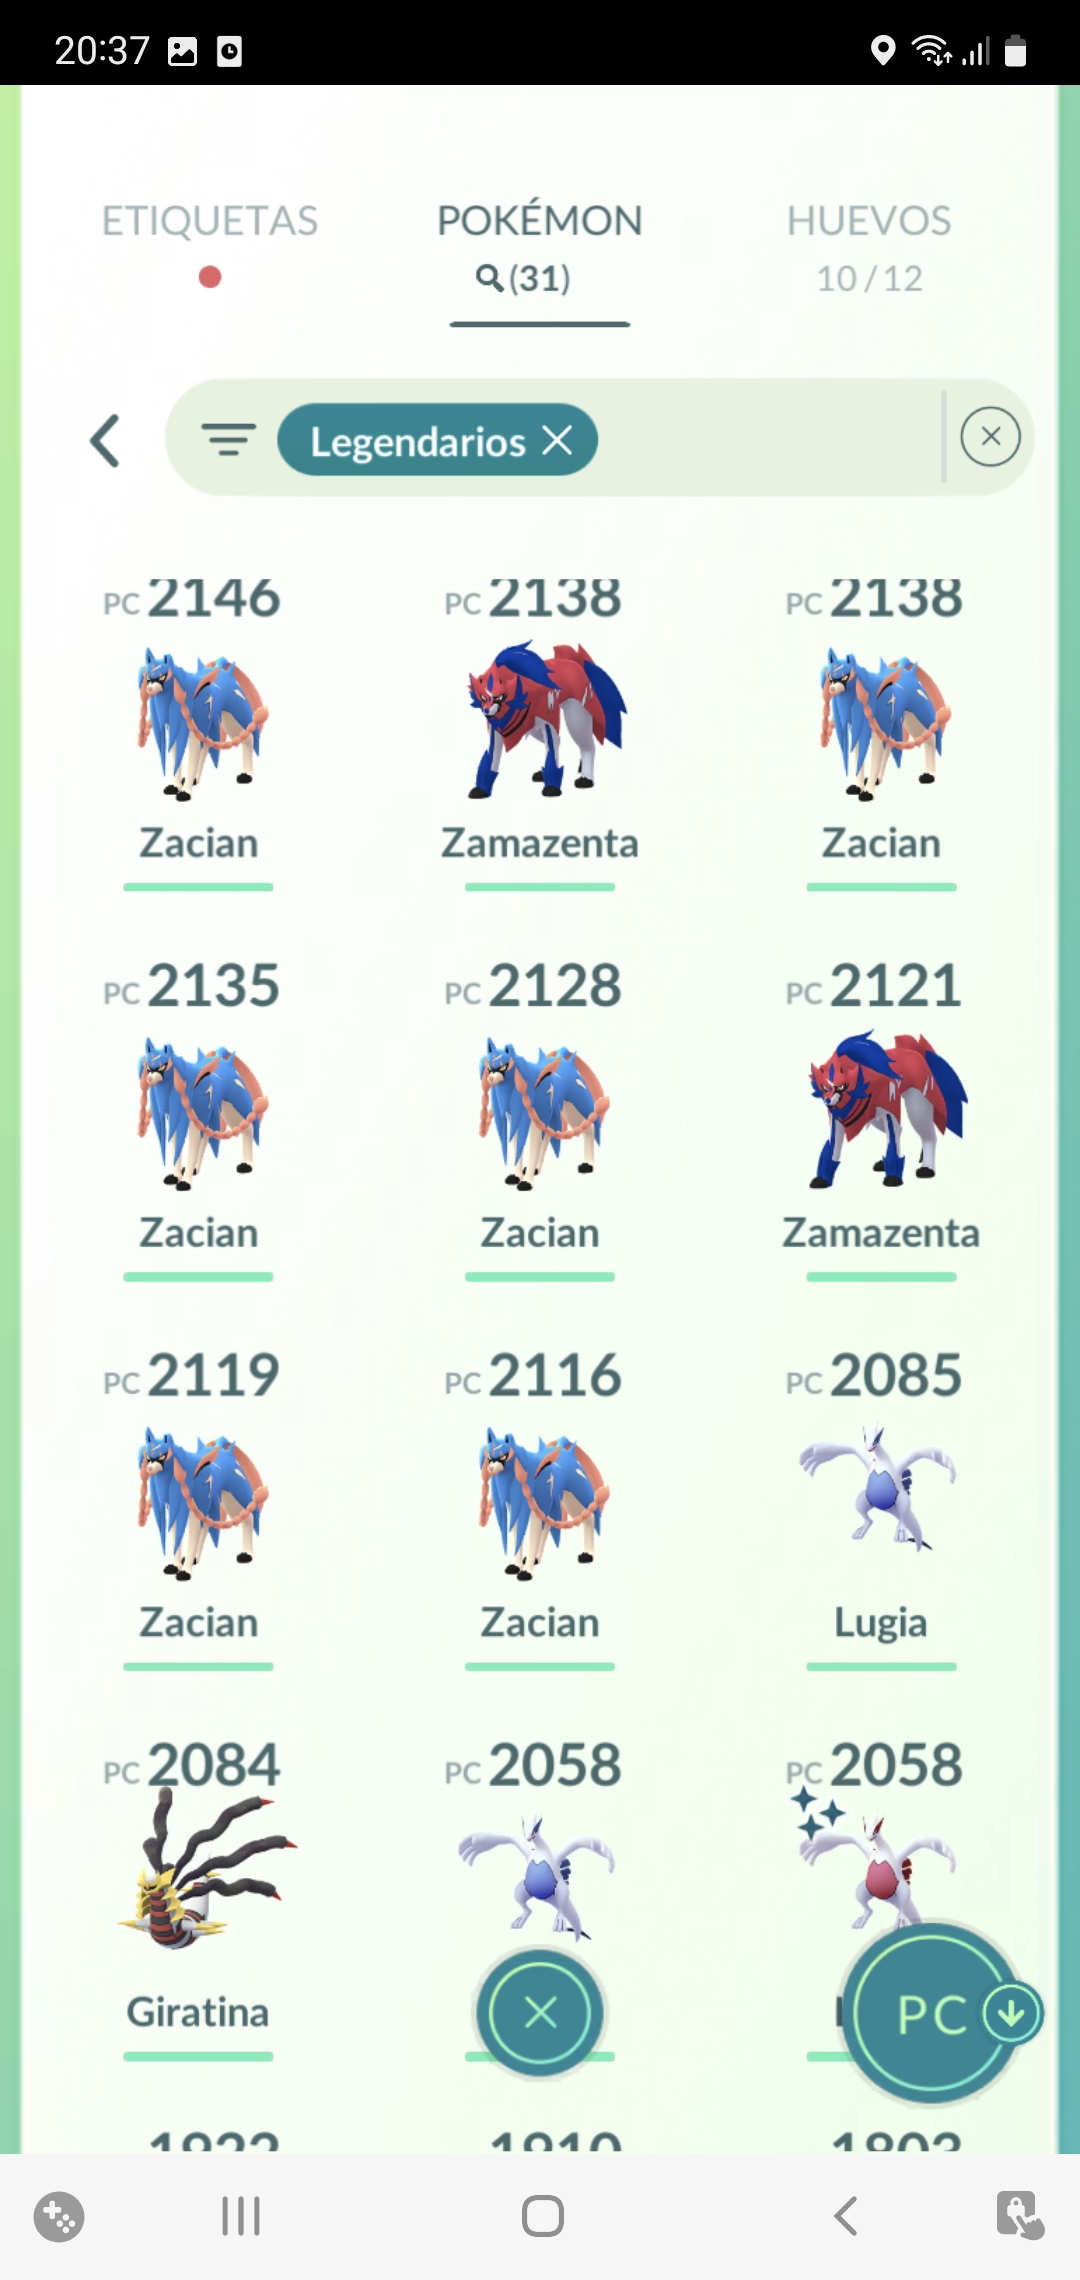 Having 31 legendary characters and 1 Lugia Shiny at level 26